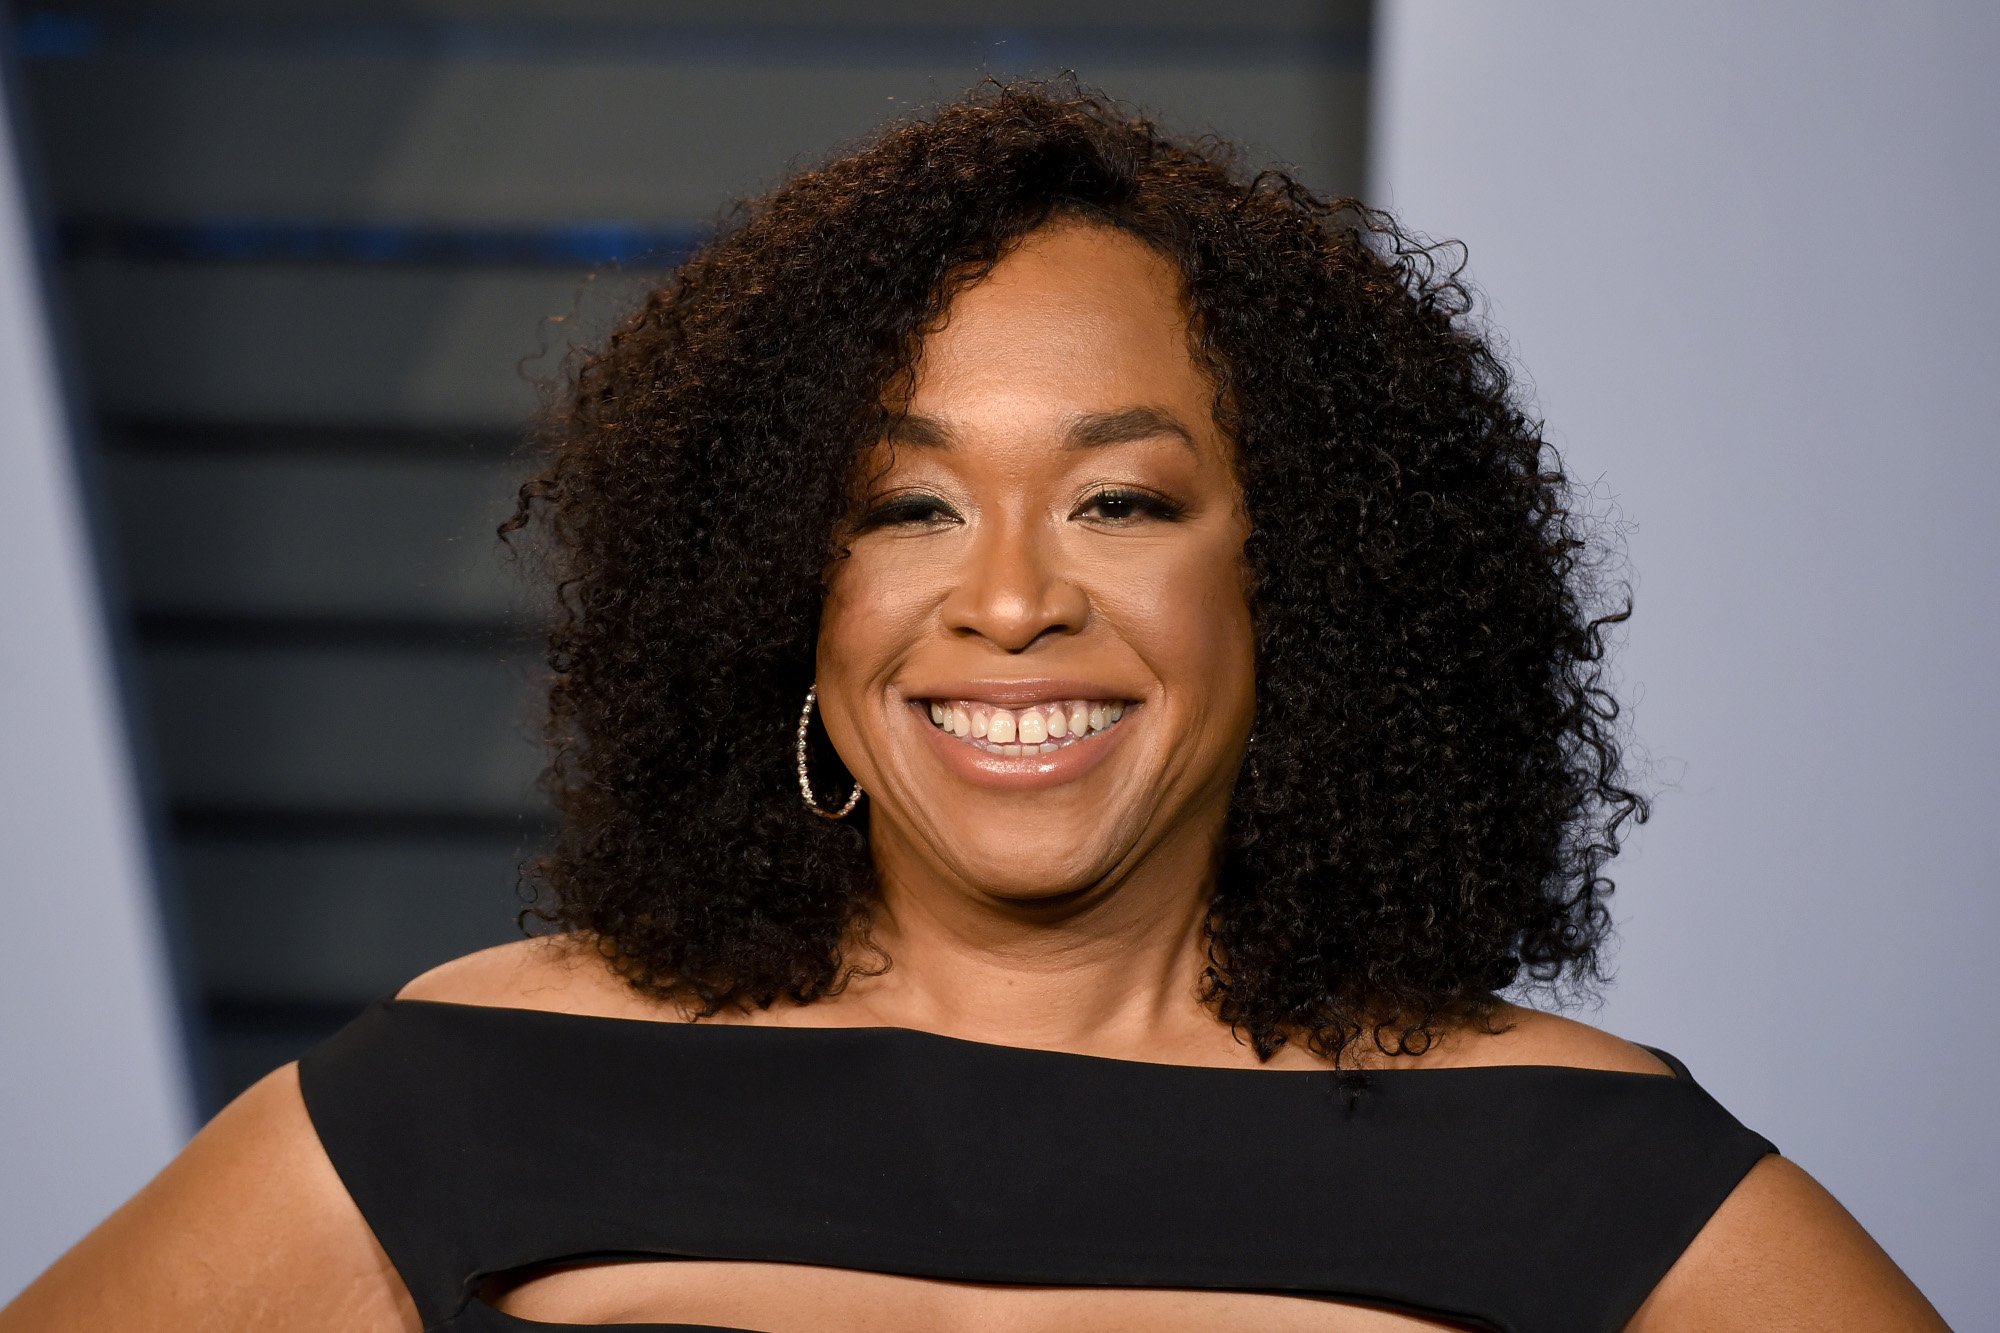 'Grey's Anatomy' creator Shonda Rhimes, who still isn't sure about how or when the series is ending. She's wearing a black dress, her hair is down and curled, and she's smiling.